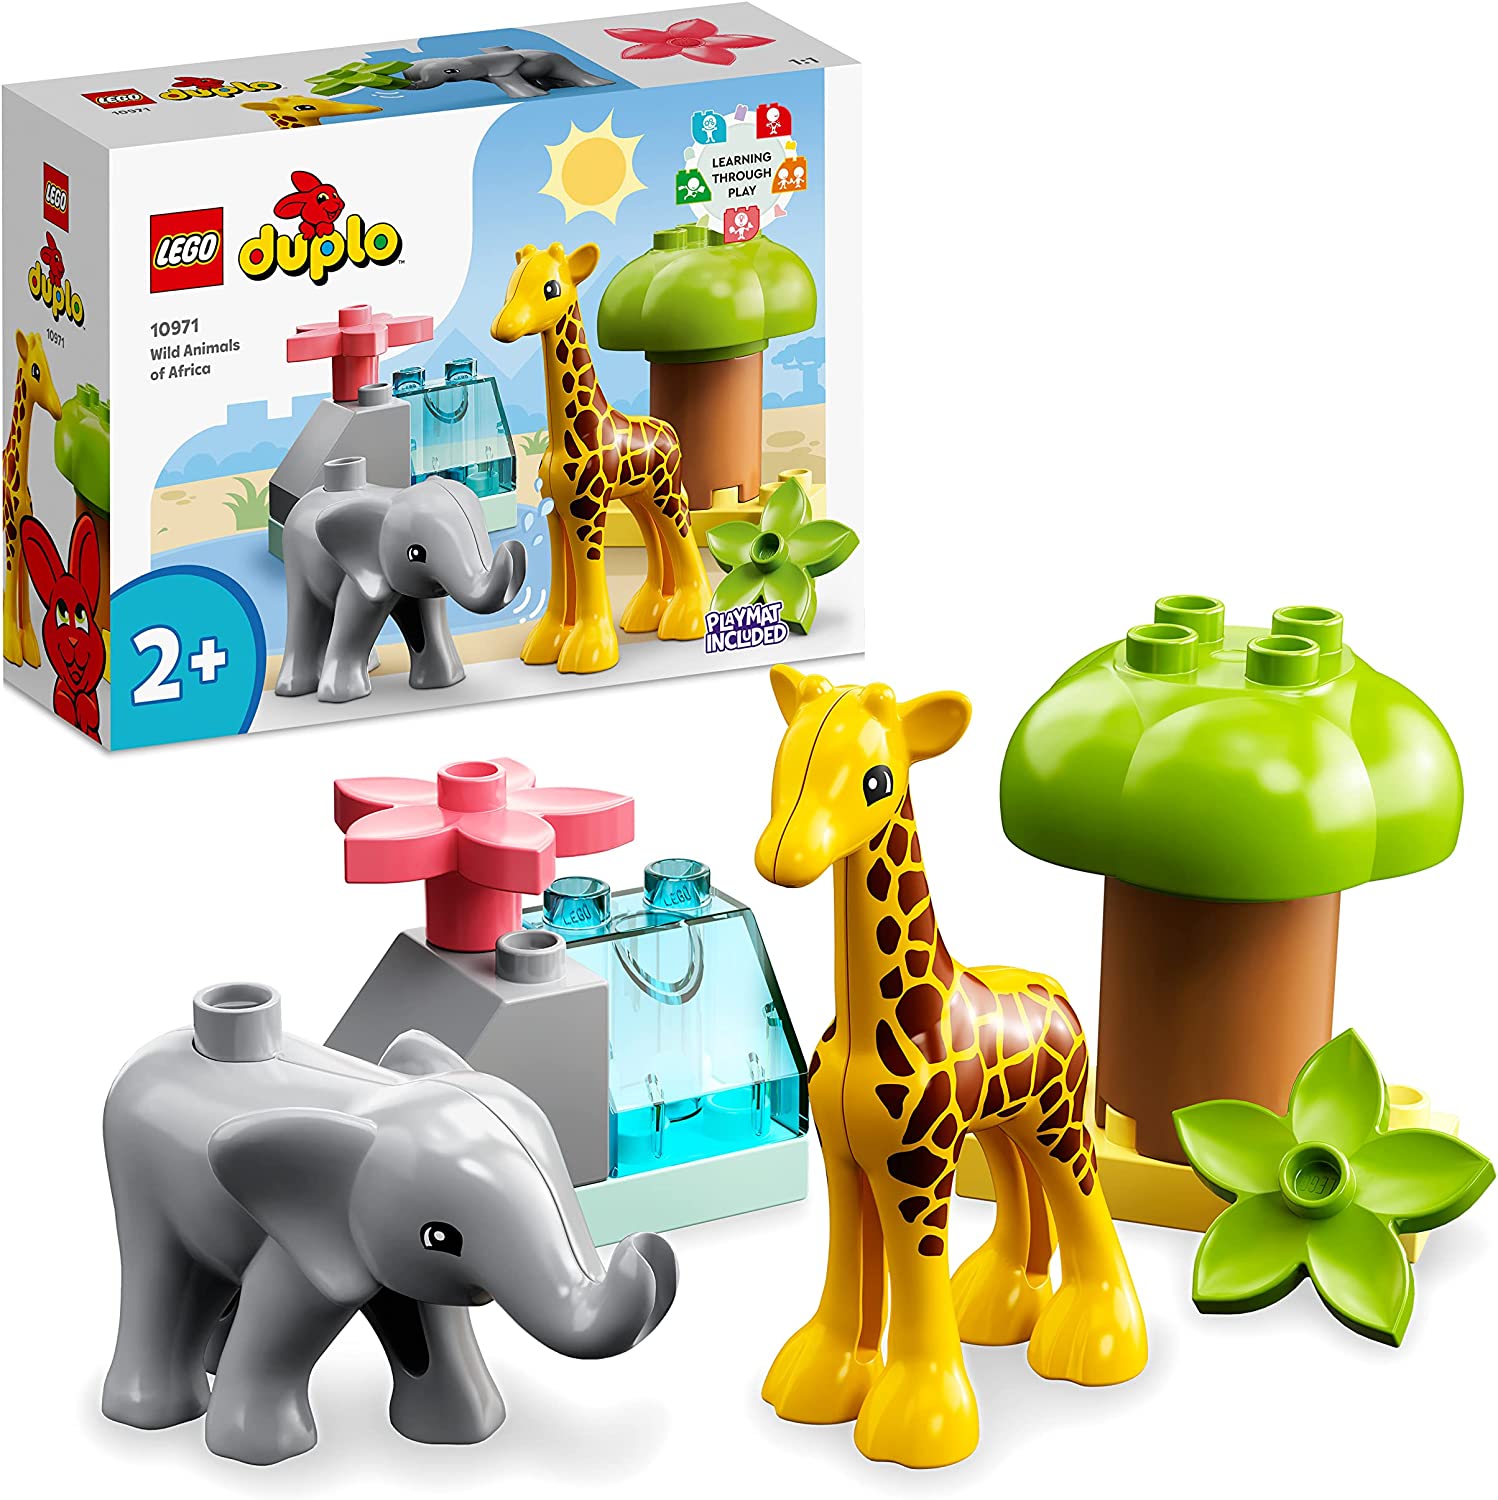 LEGO 10971 DUPLO Wild Animals Africa Toy Set for Toddlers with Animal Figures and Play Mat, Educational Toy from 2 Years